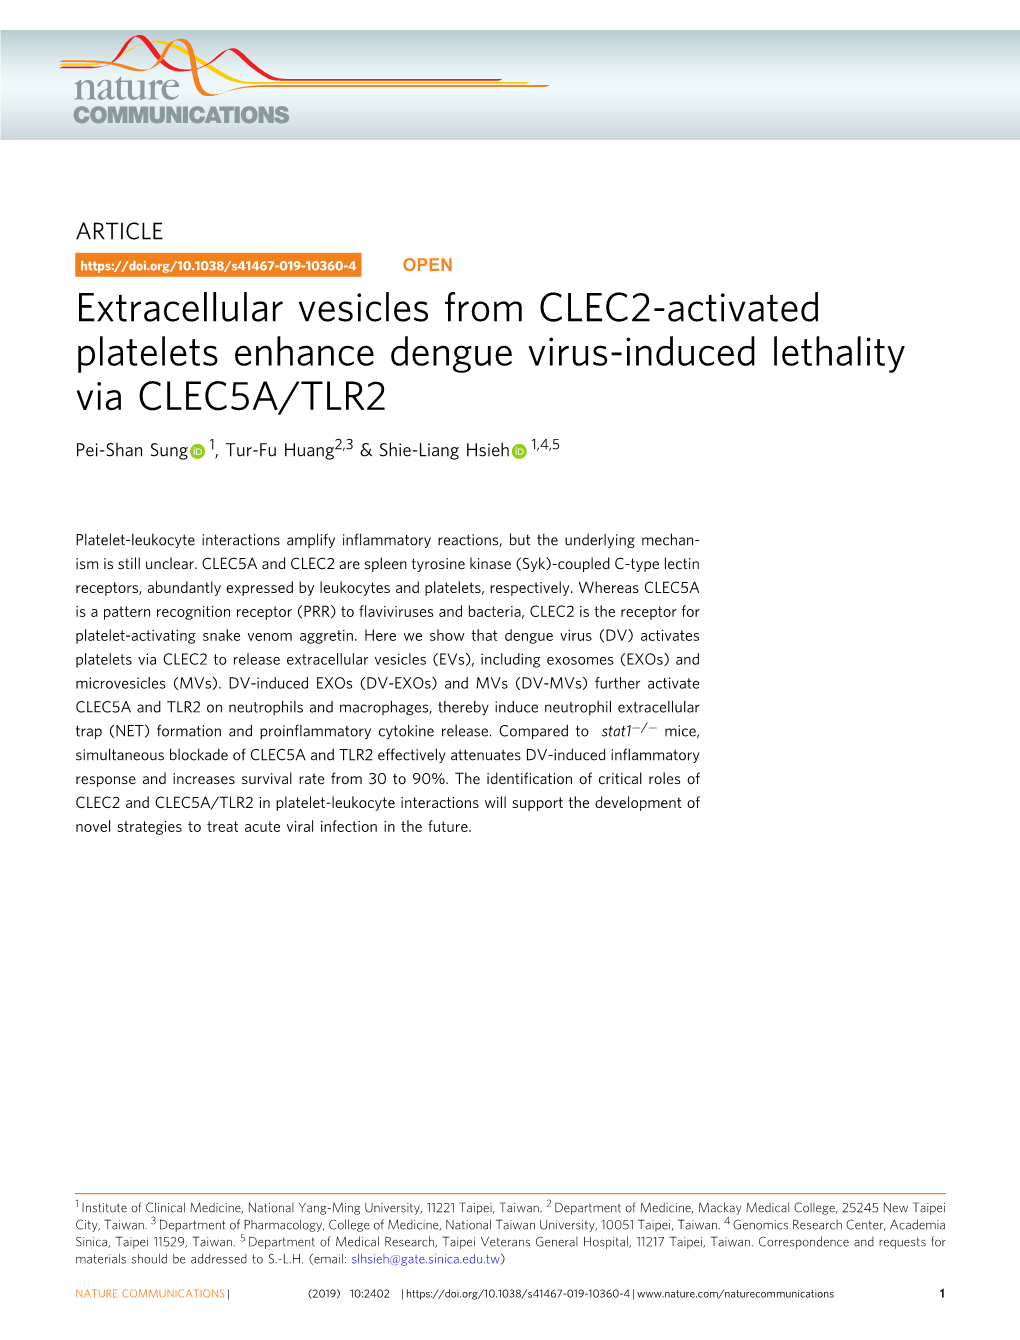 Extracellular Vesicles from CLEC2-Activated Platelets Enhance Dengue Virus-Induced Lethality Via CLEC5A/TLR2